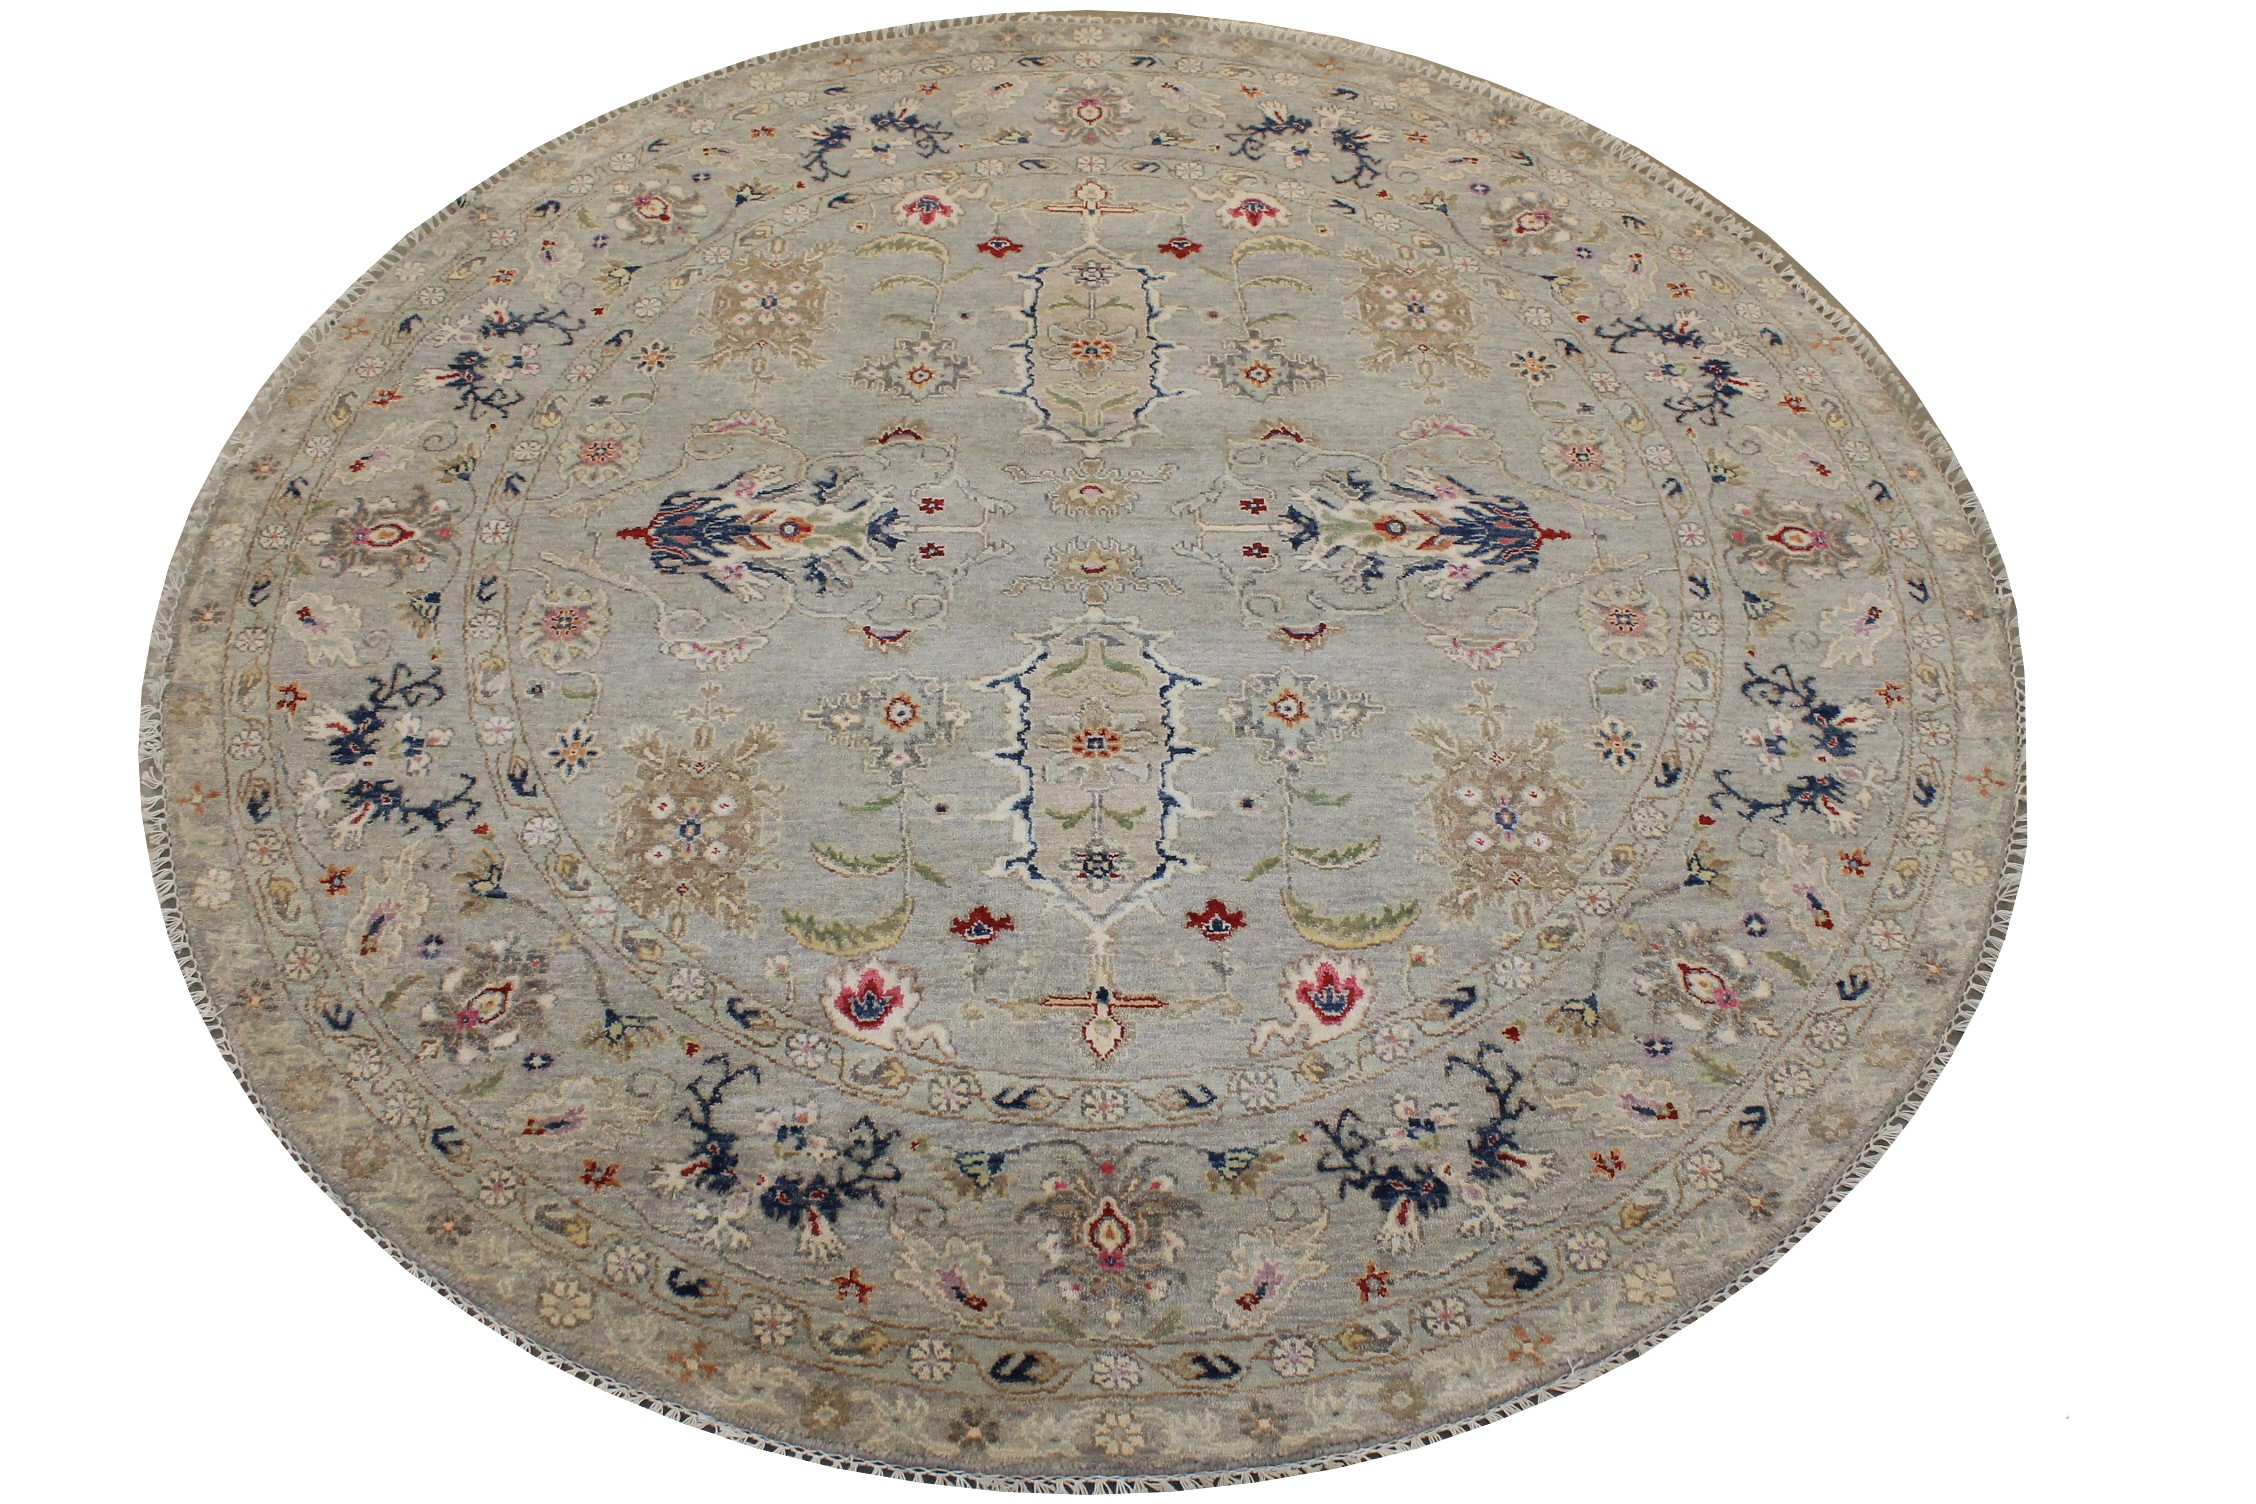 6 ft. - 7 ft. Round & Square Traditional Hand Knotted Wool Area Rug - MR028216